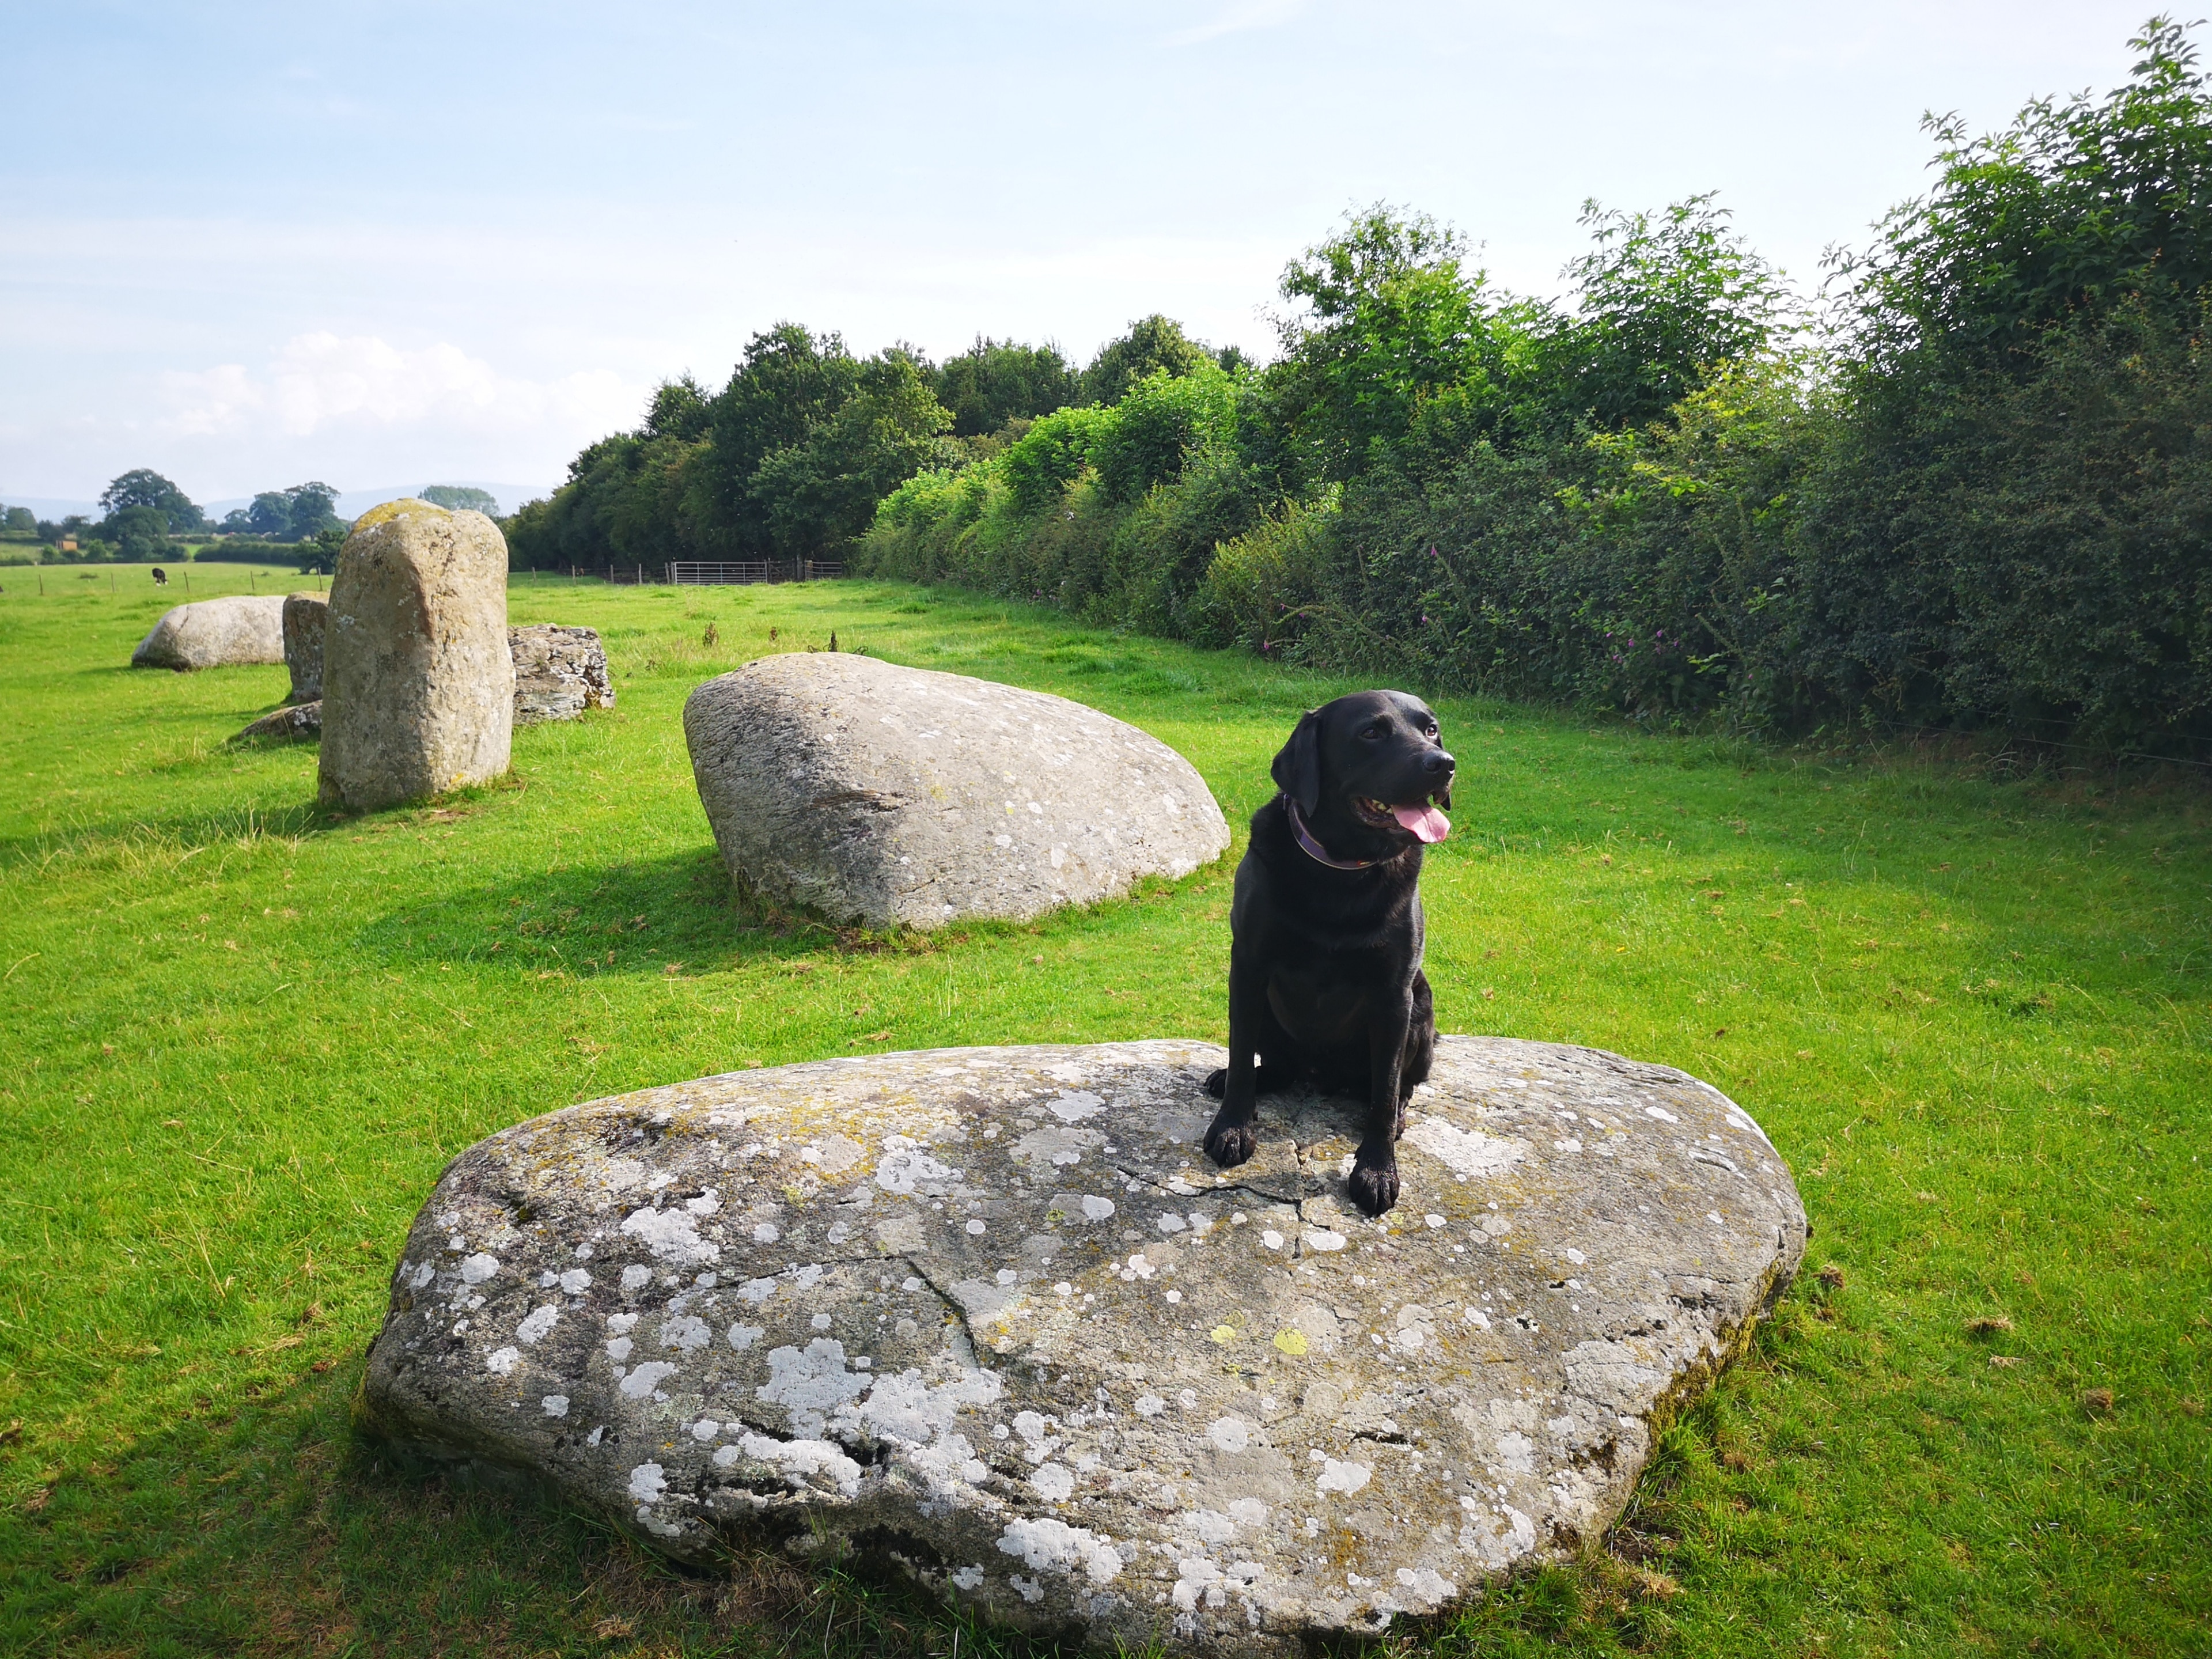 Druid stone circle, the second biggest in the UK after Stonehenge.